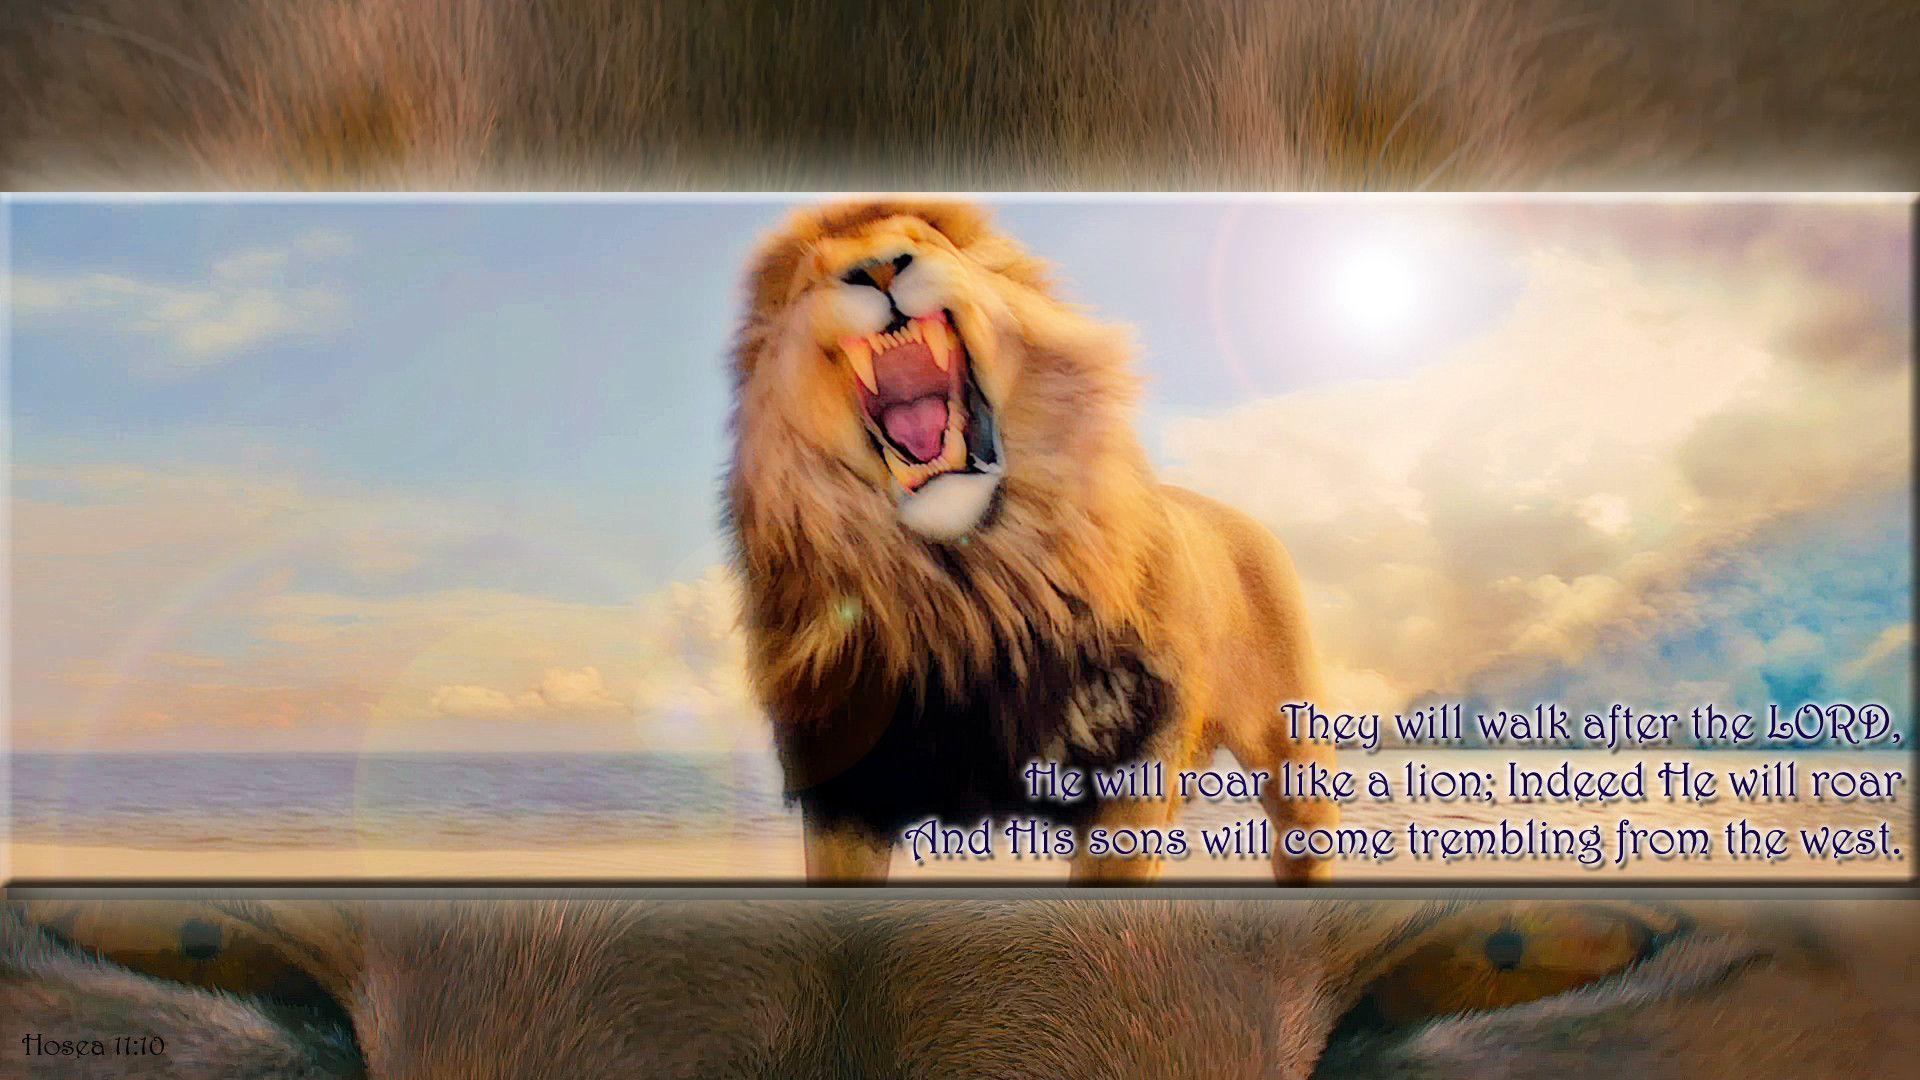 NarniaWeb Community Forums • View topic - "He will roar like a